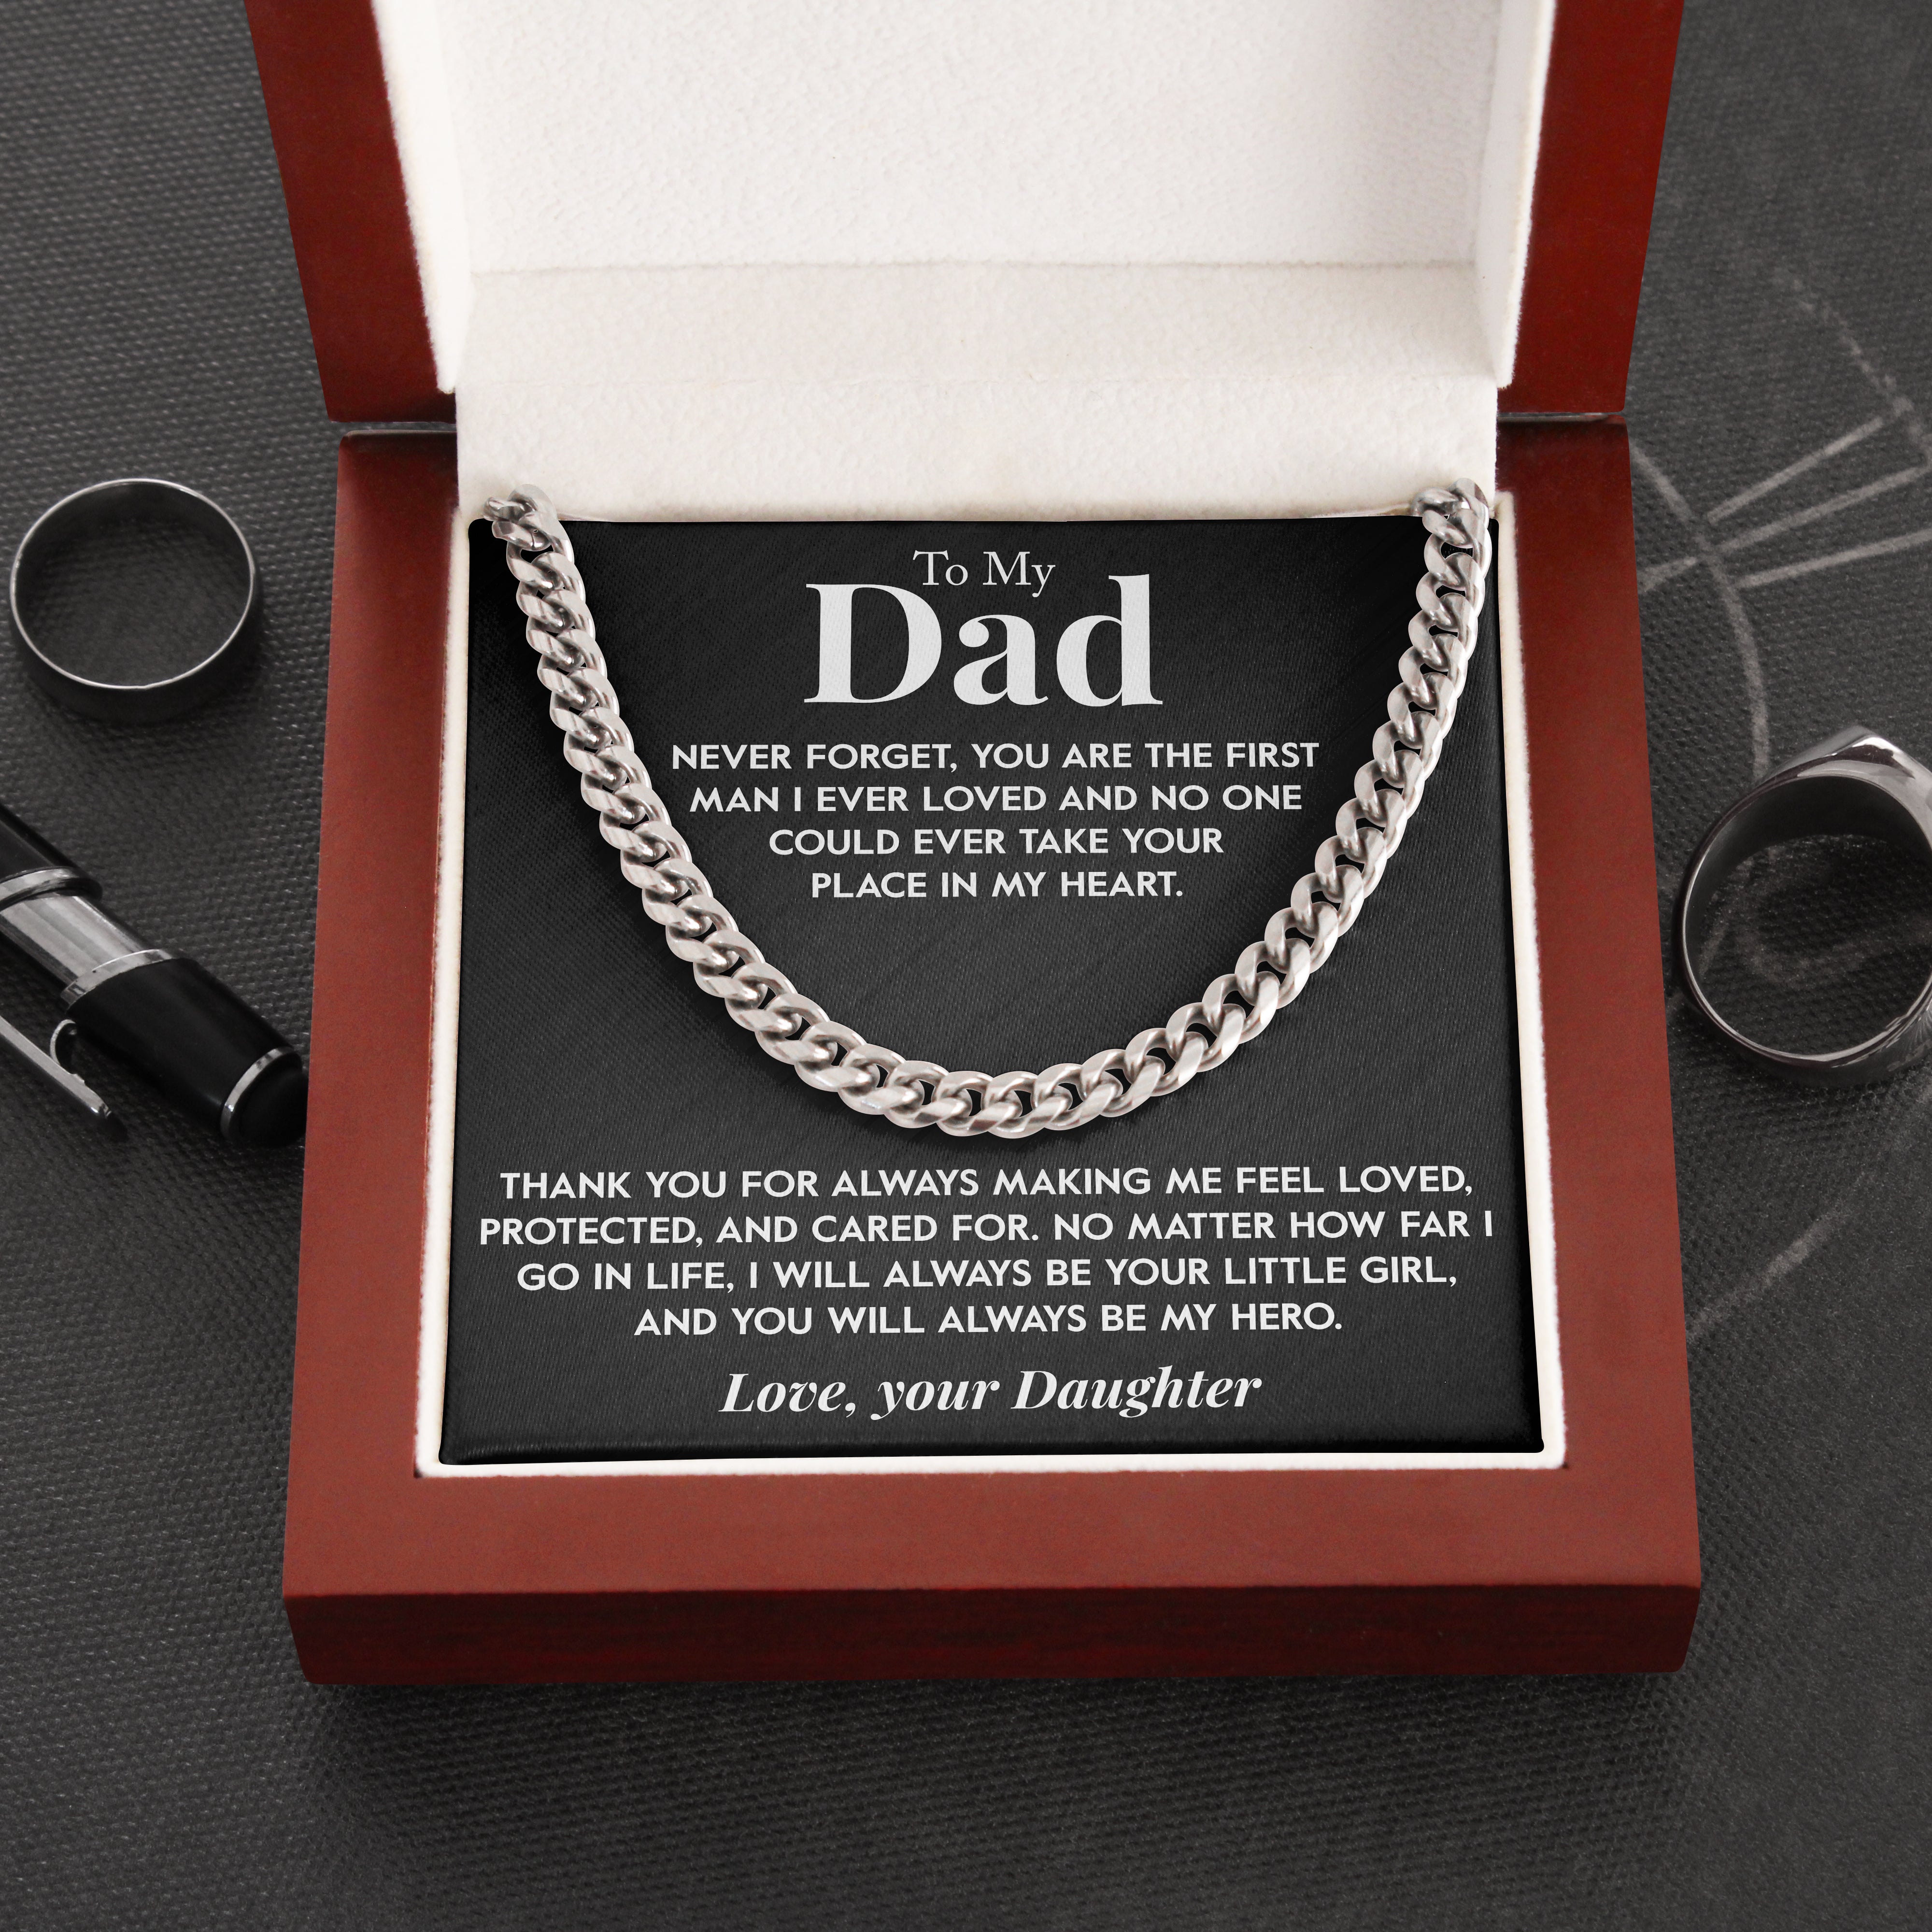 To My Dad | "Place in my Heart" | Cuban Chain Link